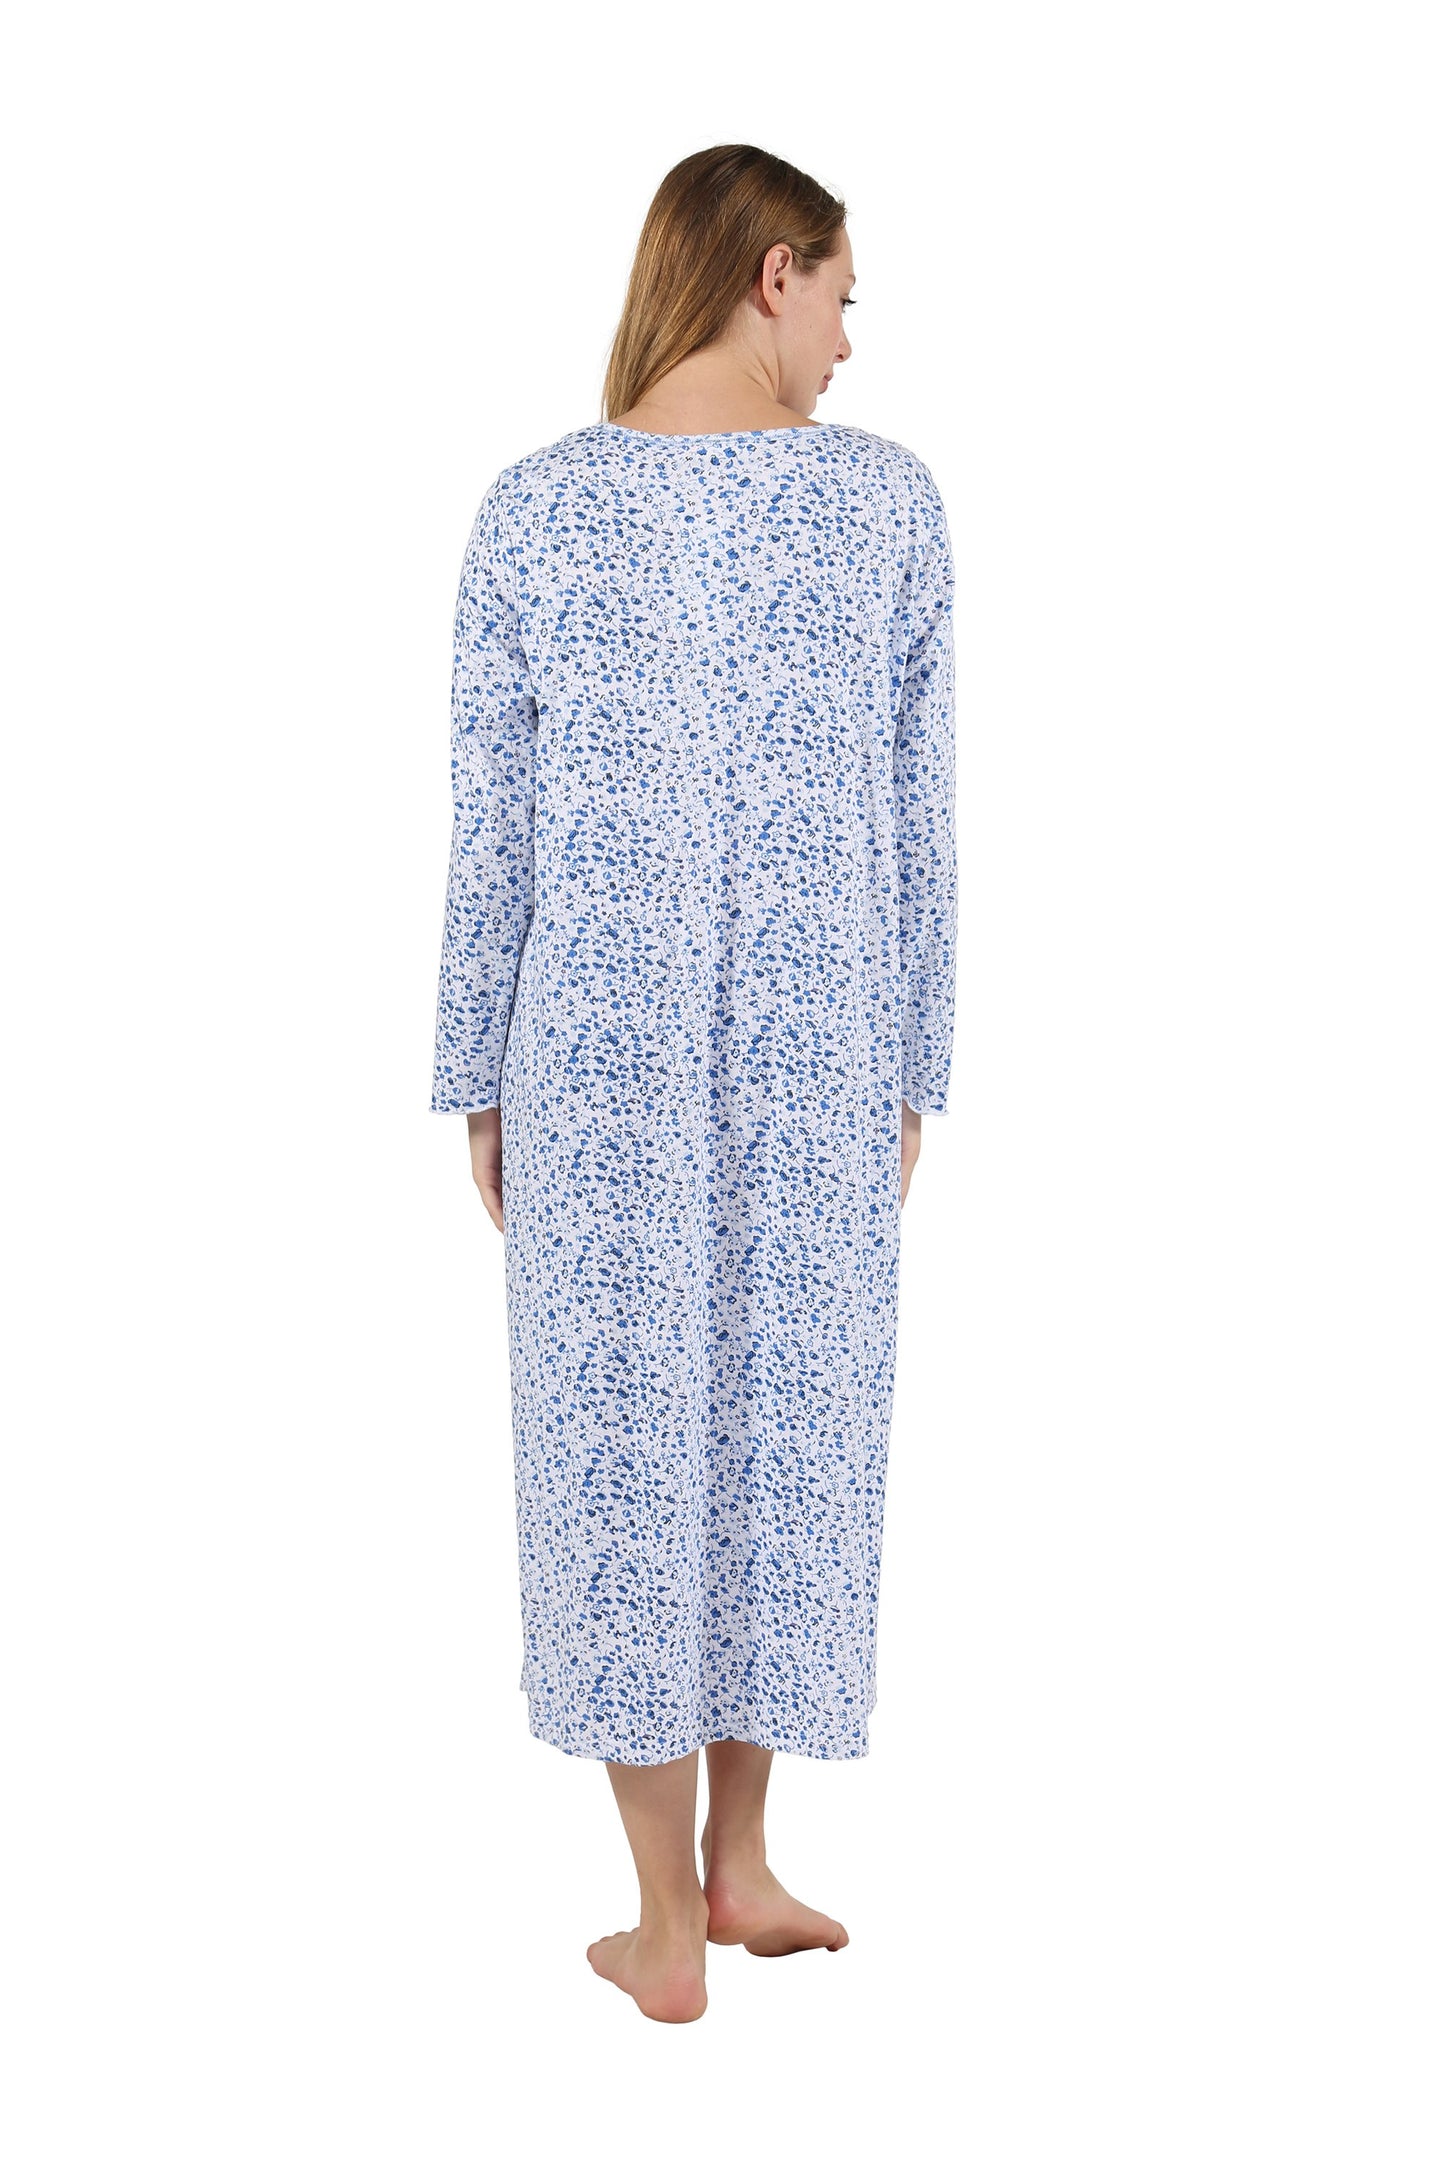 100% Cotton Knit Mid-Length Nightgown 1530G - Blue Floral